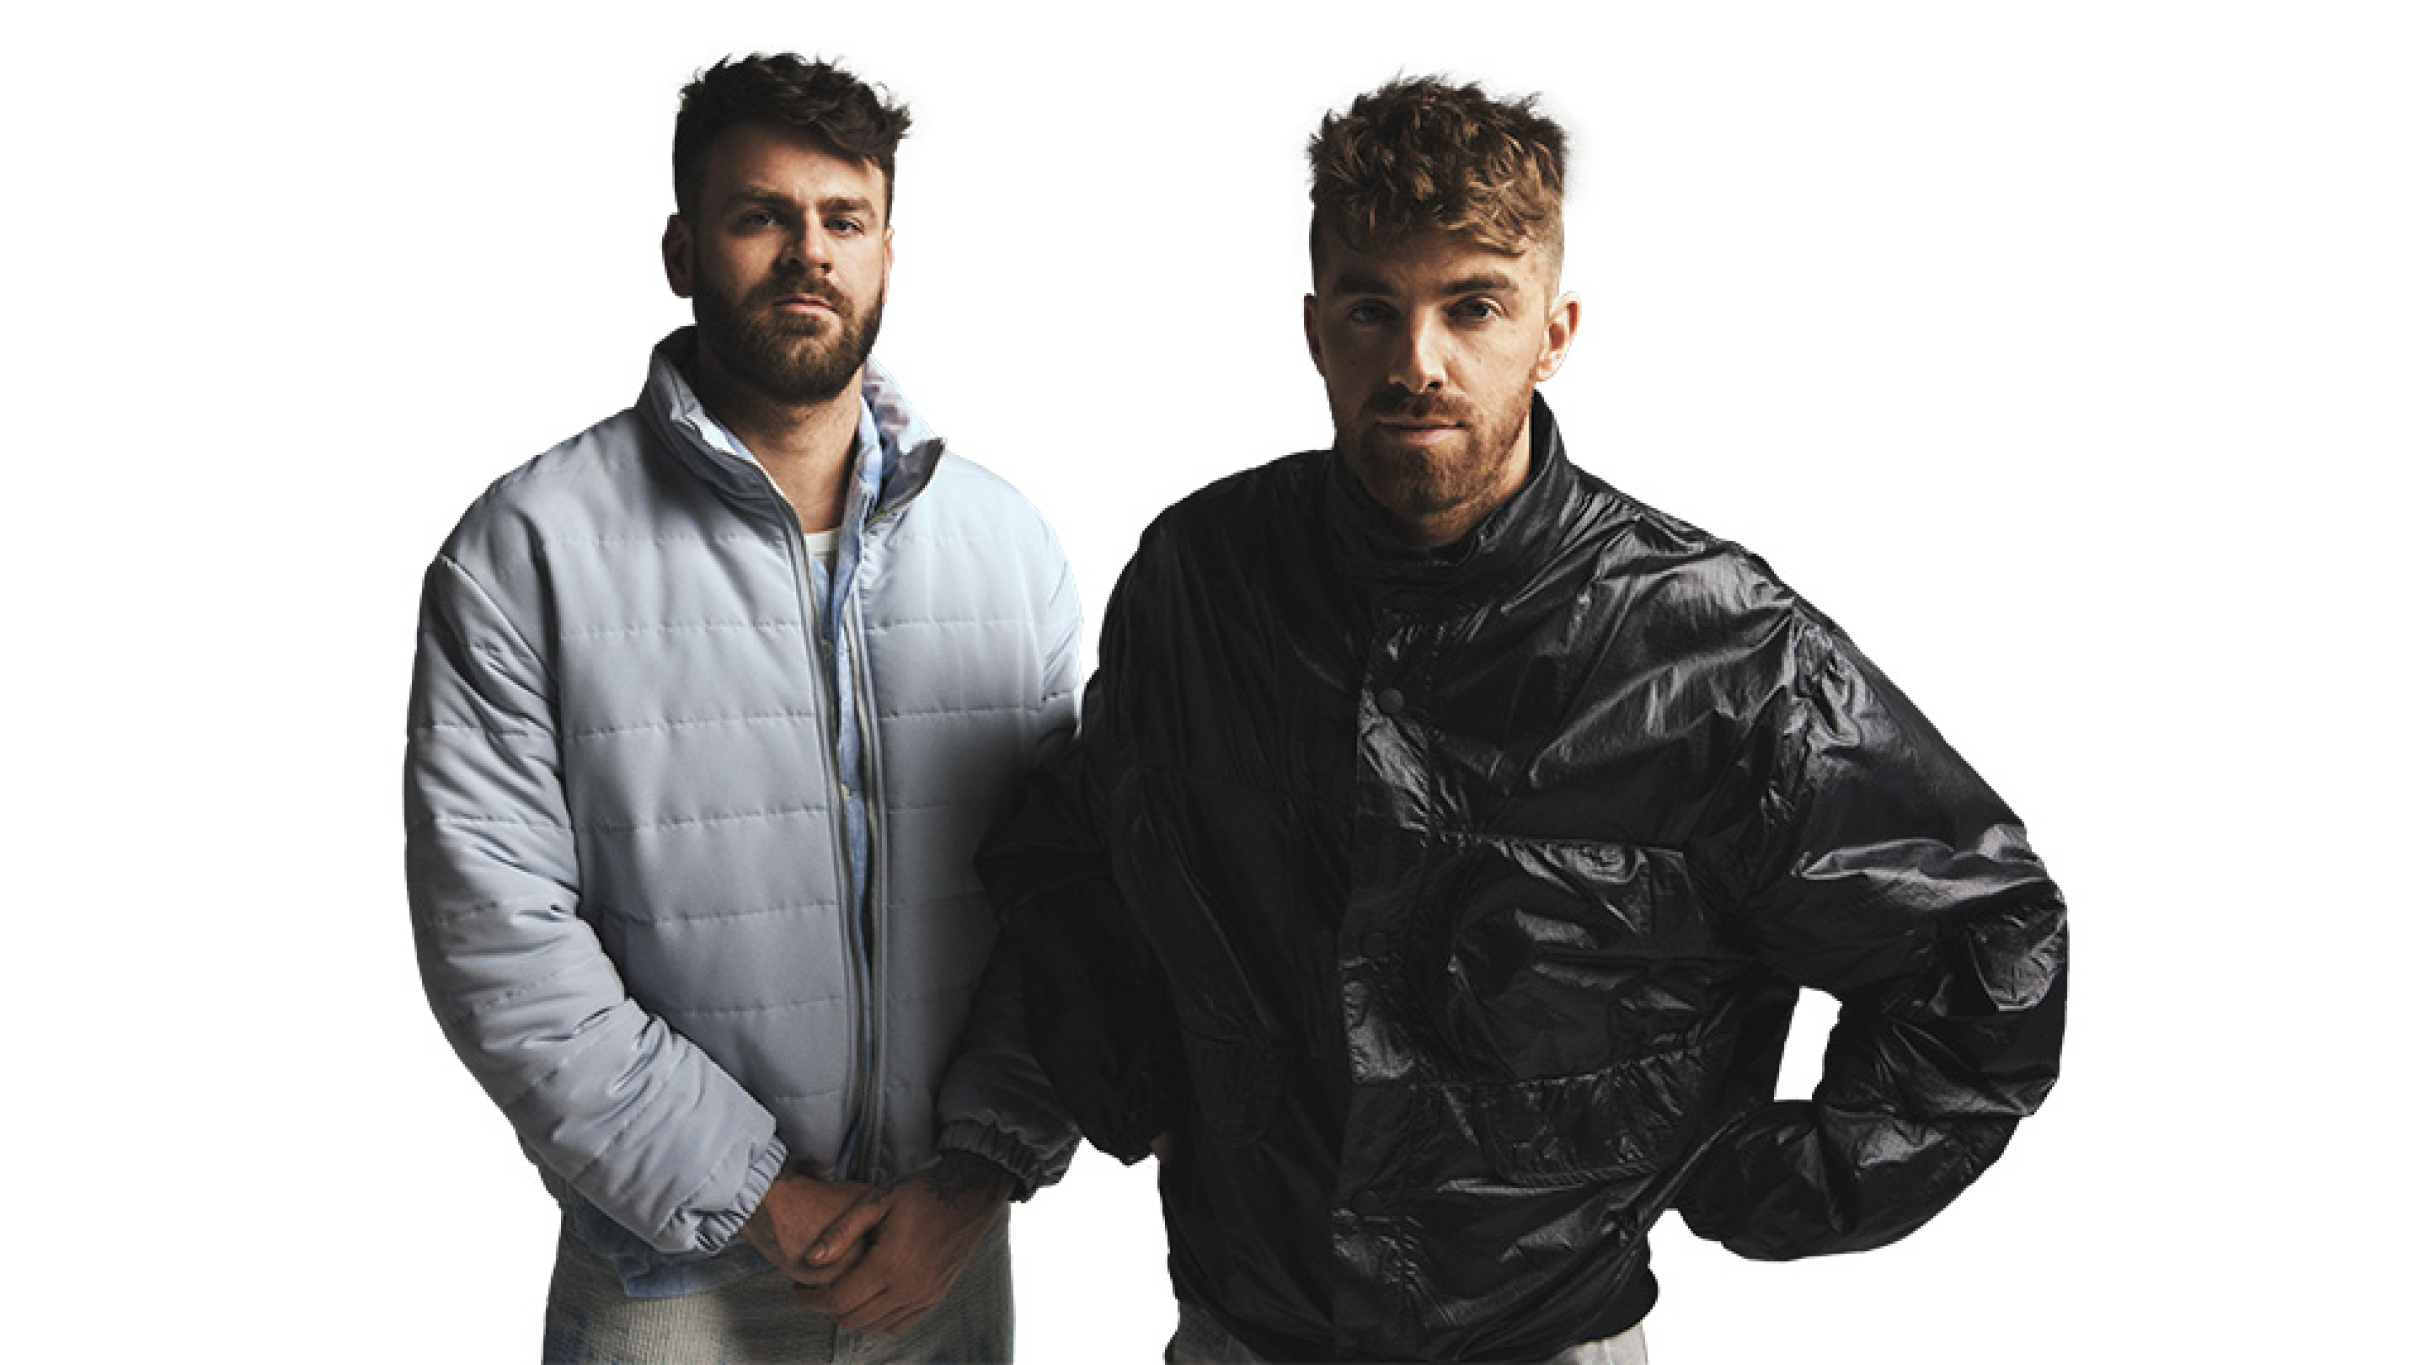 Concerts Du Podium: The Chainsmokers